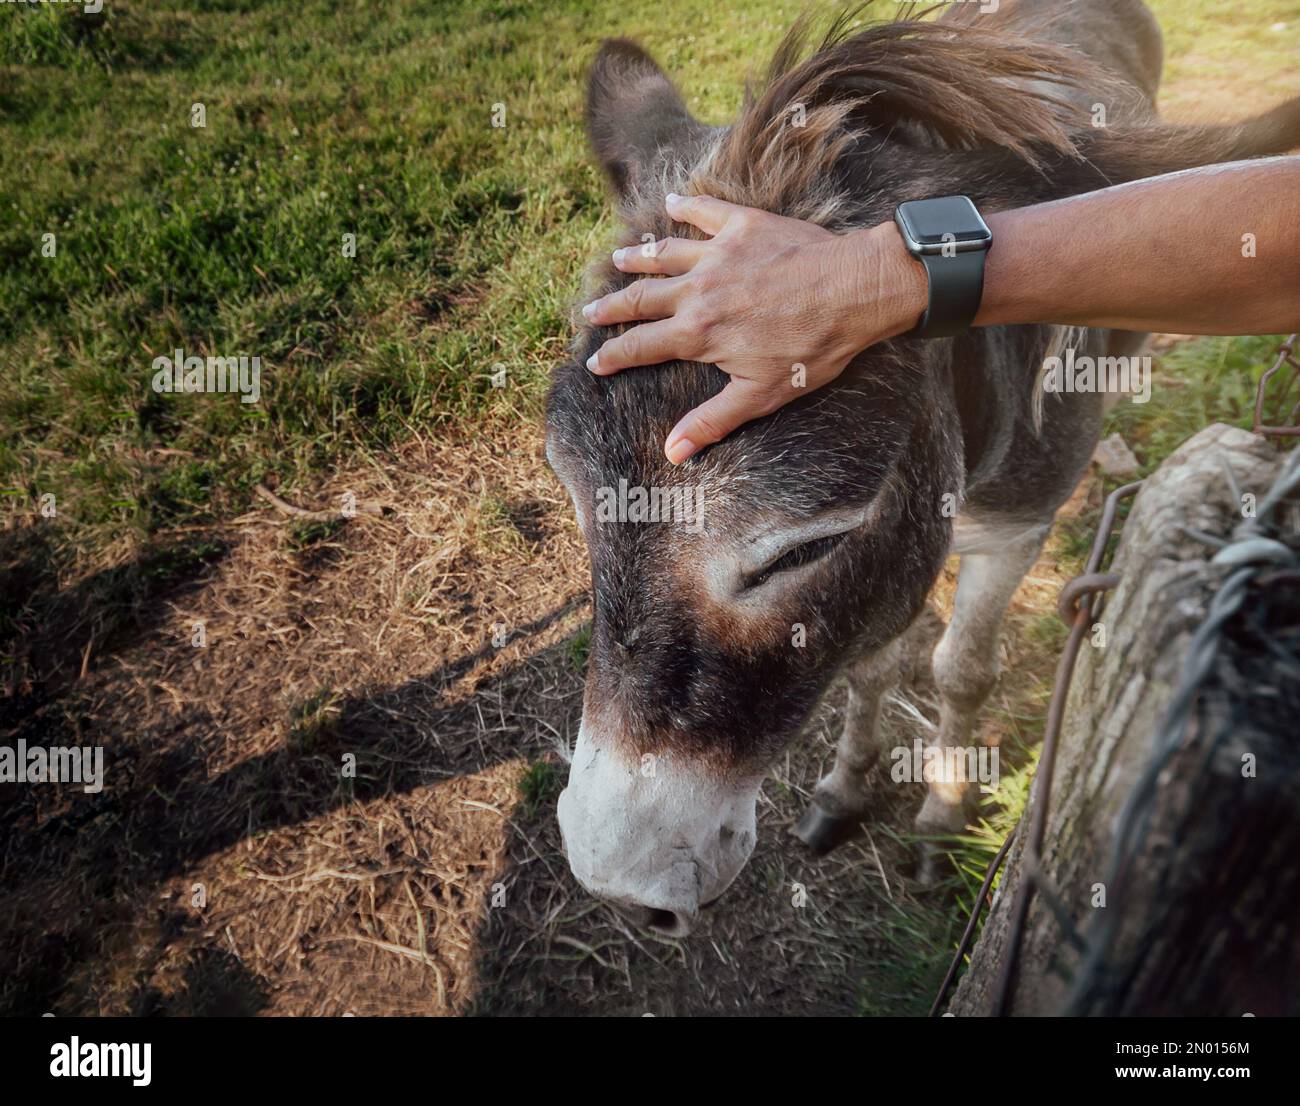 the hand of a person in the foreground lovingly caresses the head of a donkey in freedom. concept of care and protection of animals. ecology and envir Stock Photo